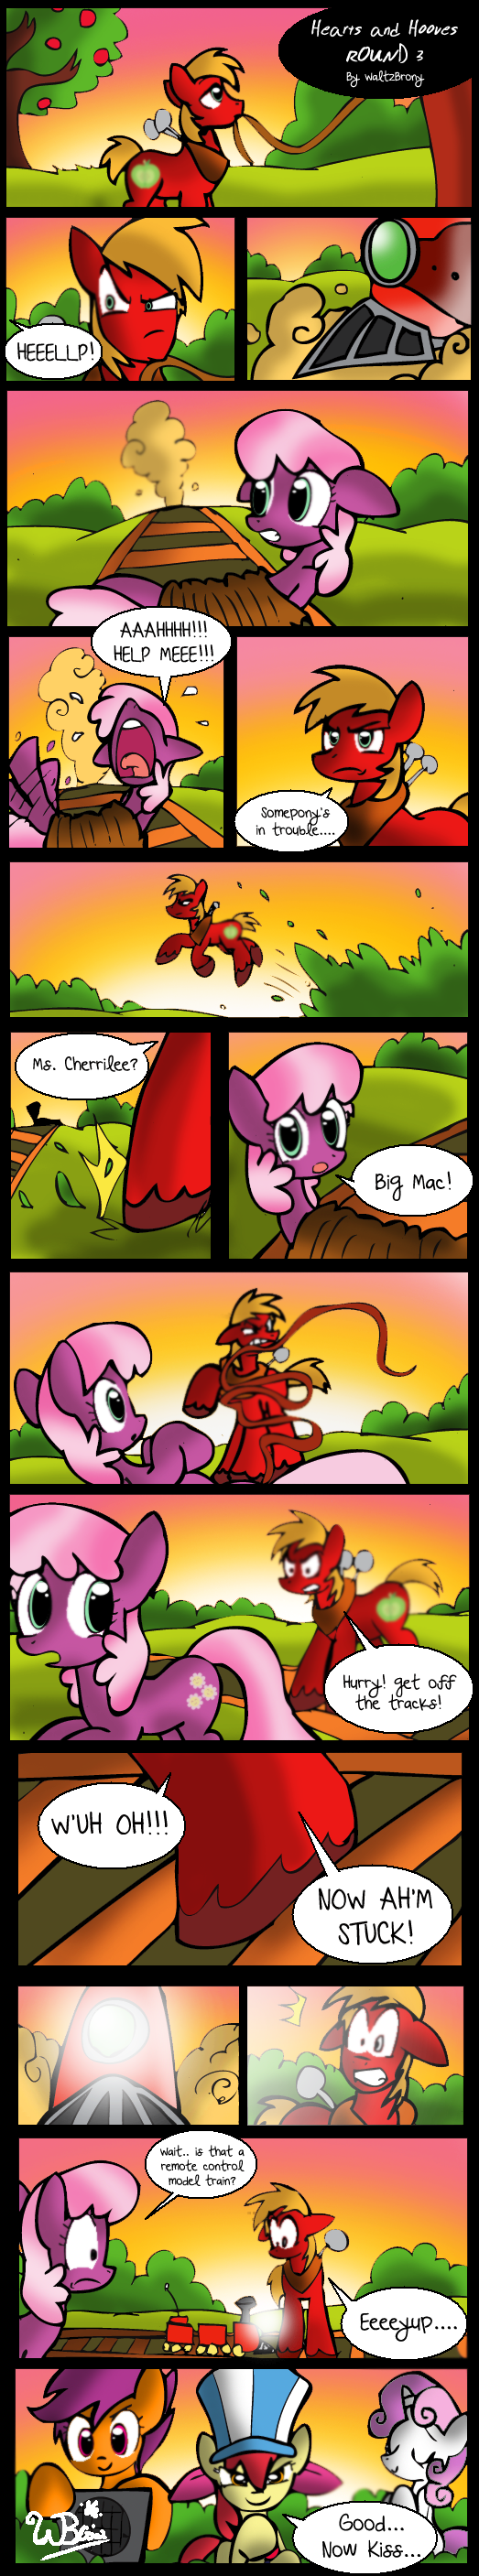 Hearts and Hooves Part 3. Shippers ruin lives ~anonymous.. Devilish plans for the future.